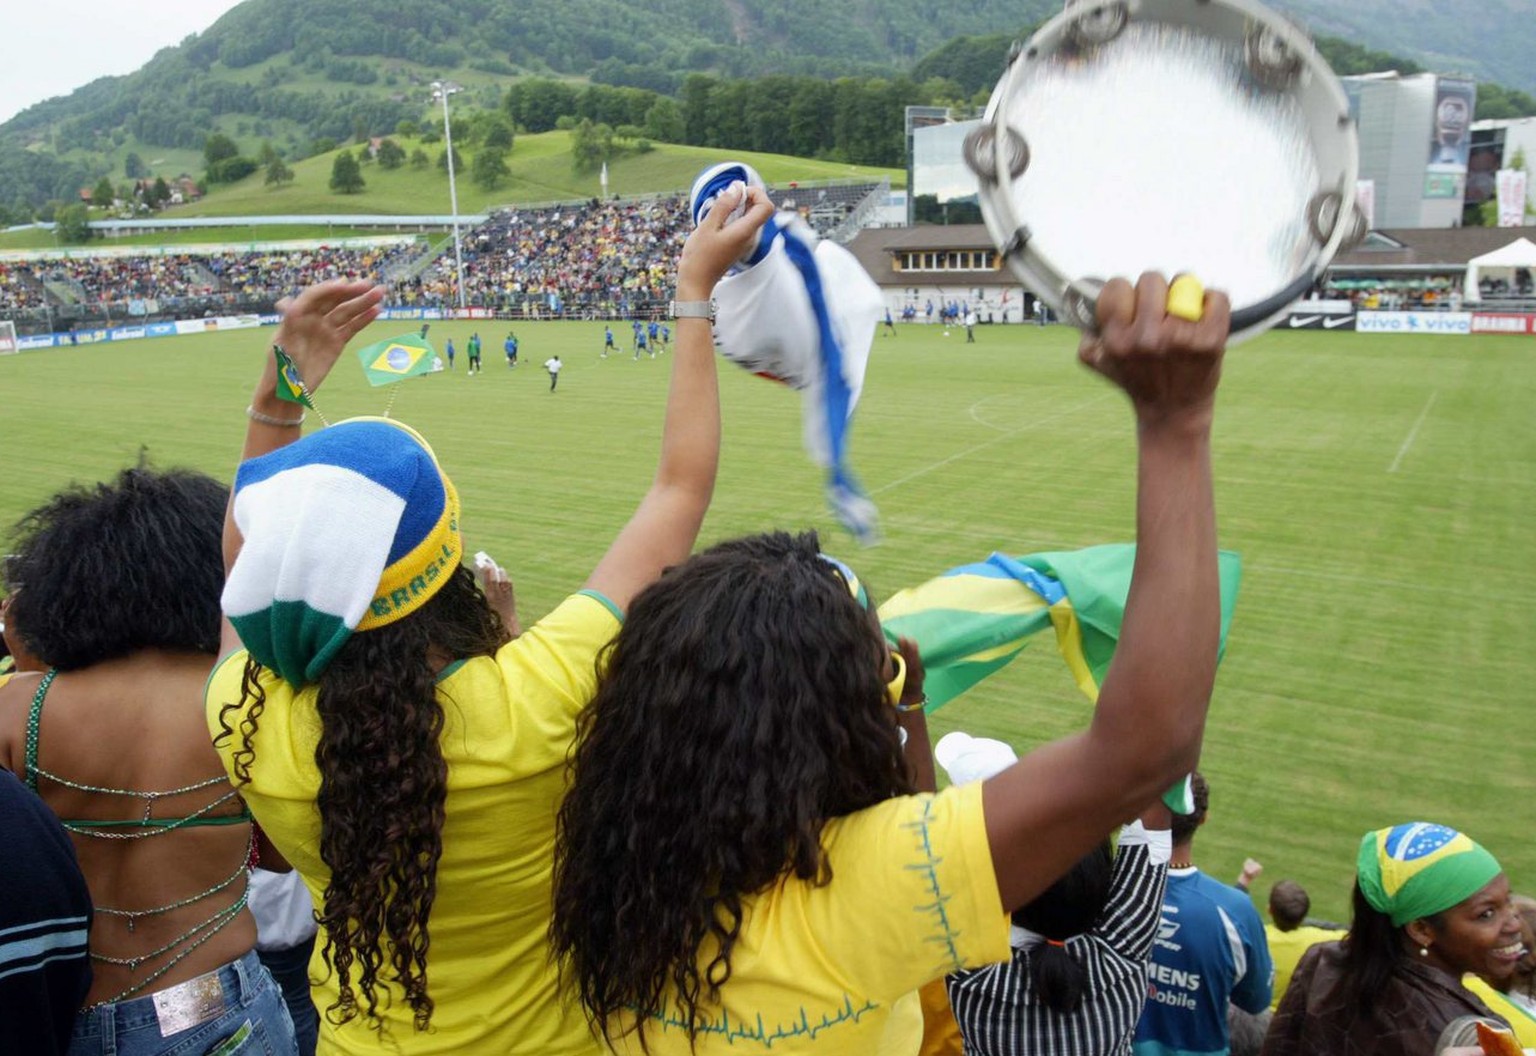 Fans of the Brazilian national soccer team cheer during a trainingsession in Weggis, Switzerland, on Thursday, 25 May 2006. The Brazilian team is in Weggis to prepare for the upcoming World Cup in Ger ...